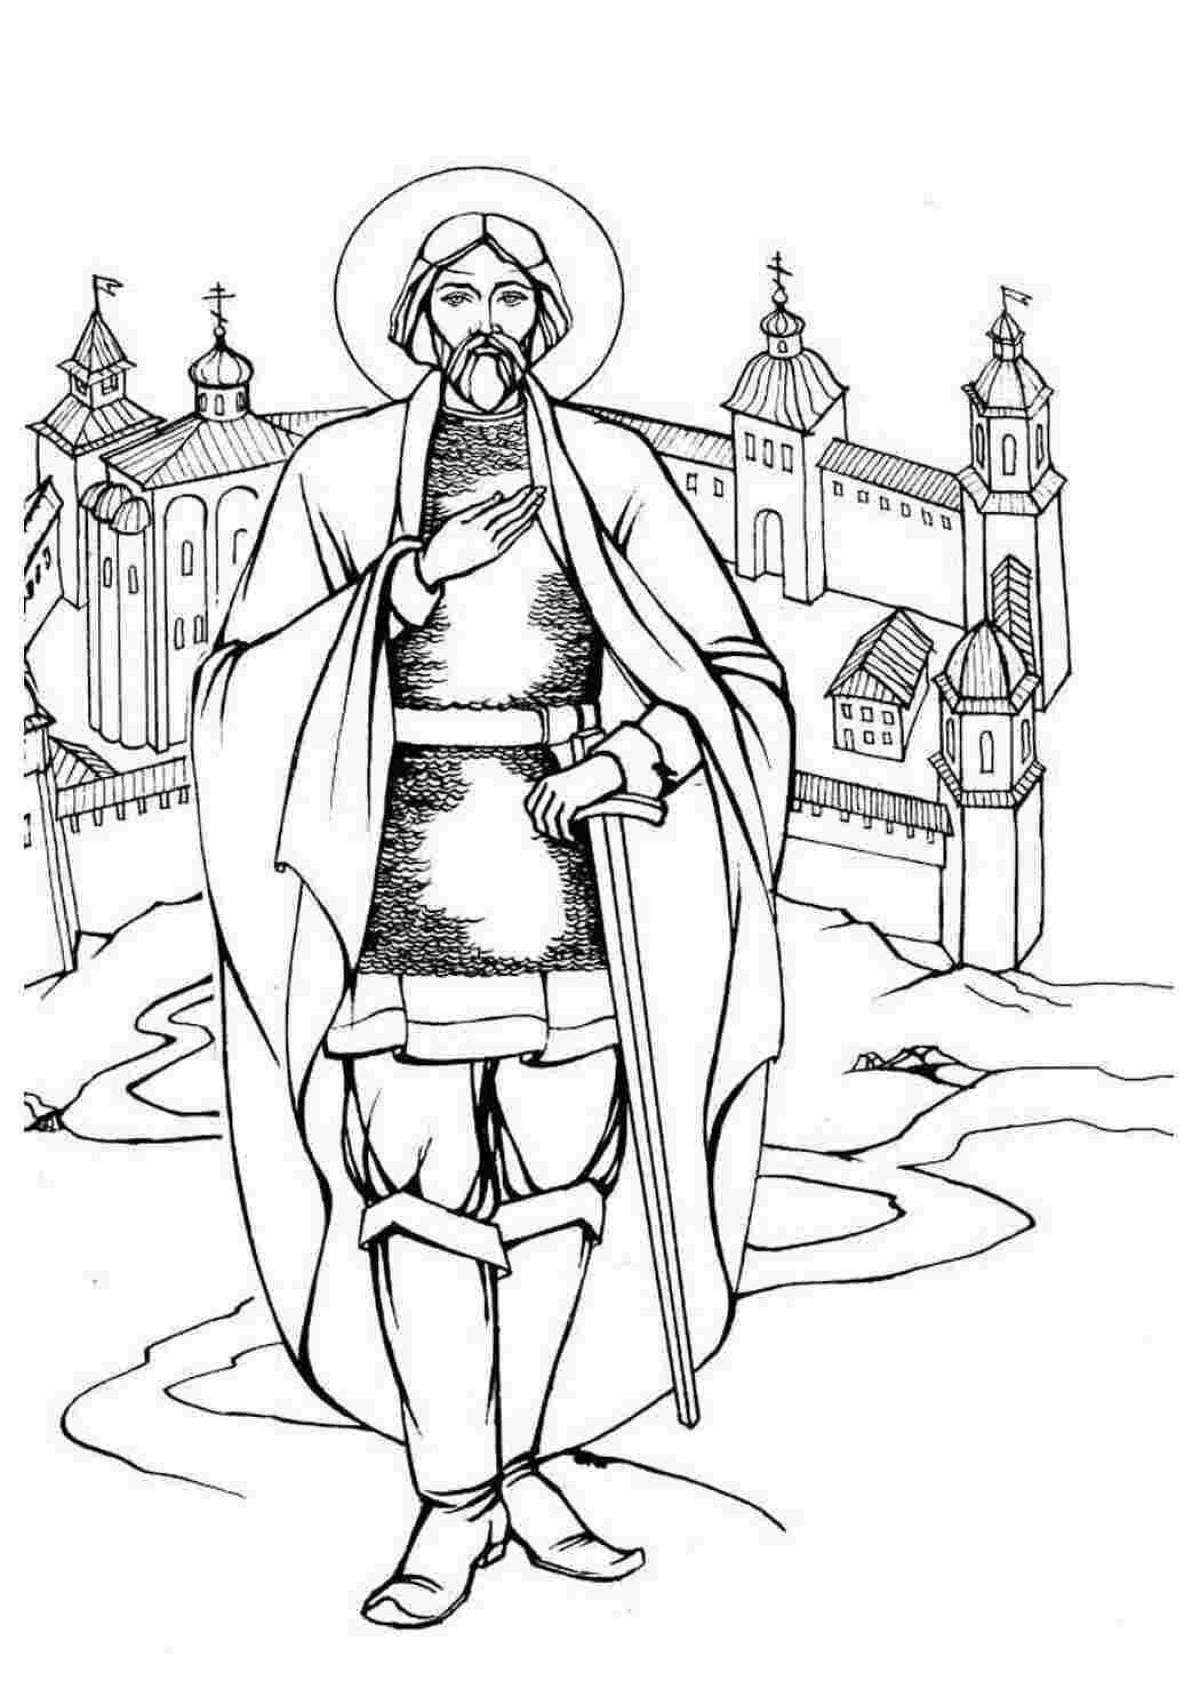 Coloring book charming dmitry donskoy